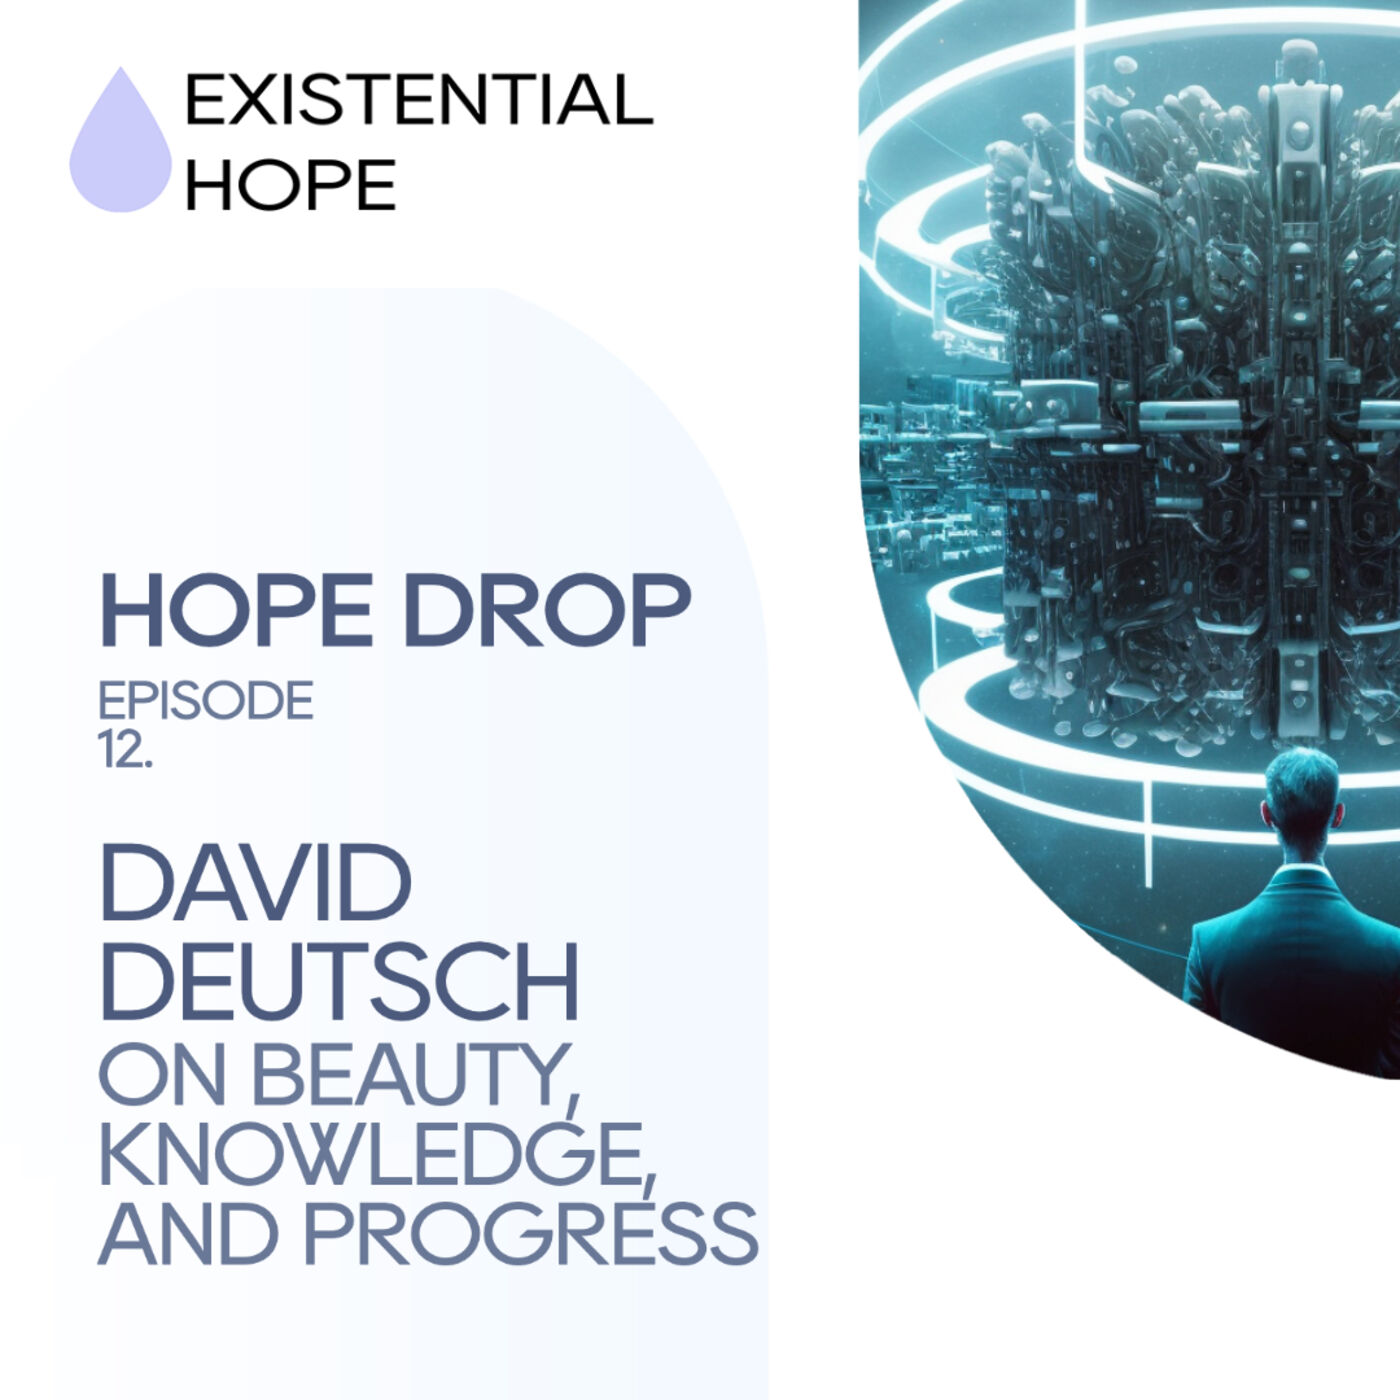 Existential Hope Podcast: David Deutsch | On Beauty, Knowledge, and Progress